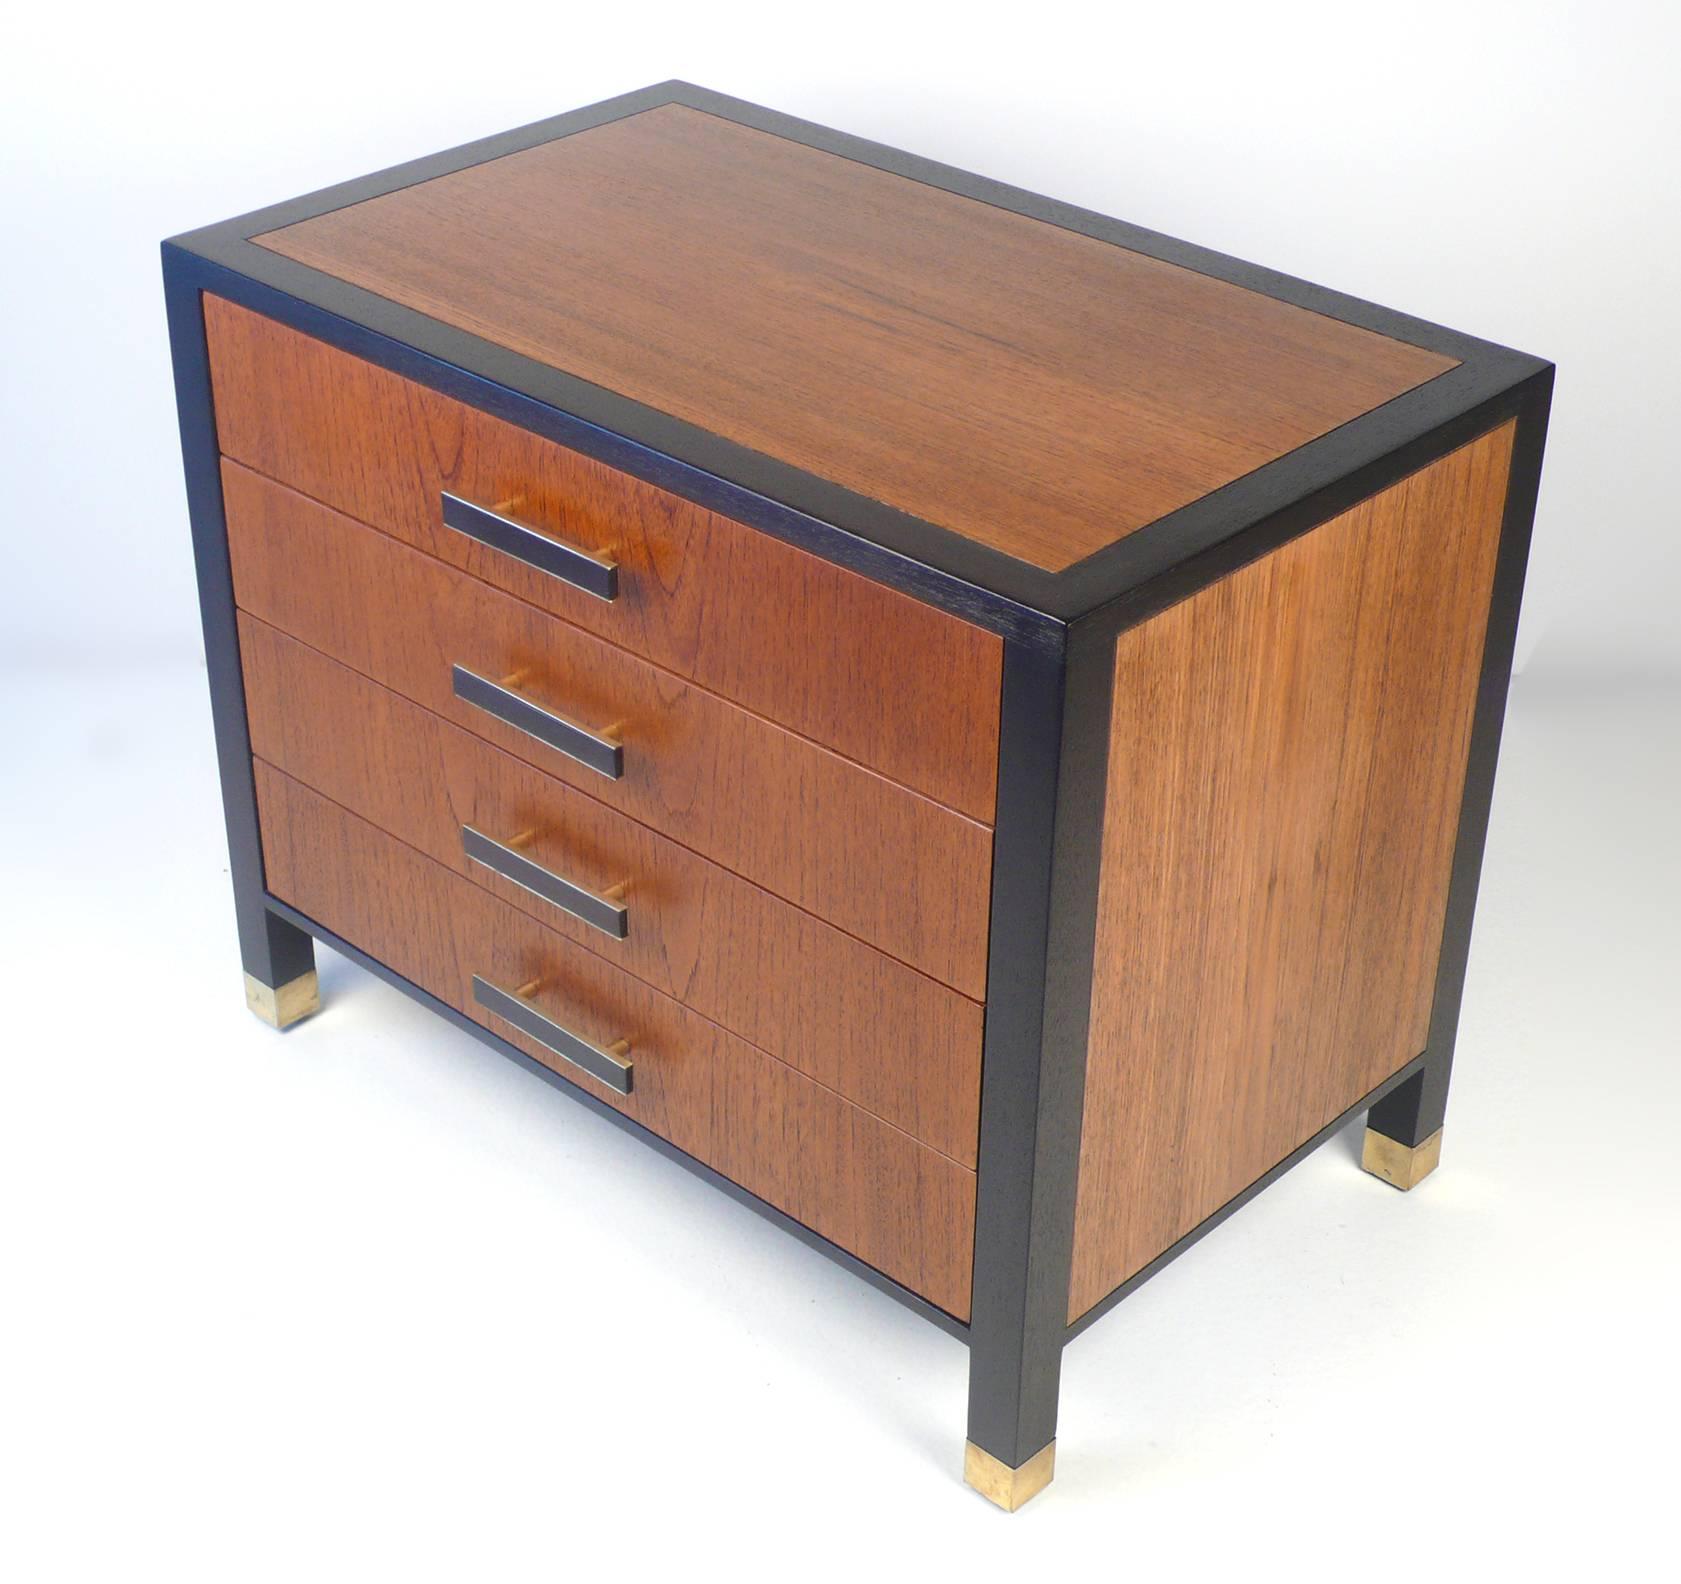 This is a beautiful miniature cabinet by Harvey Probber. It would serve perfectly as a nightstand or an end table. The chest consists of a solid mahogany frame finished in espresso lacquer with four teak drawers and inset teak panels.